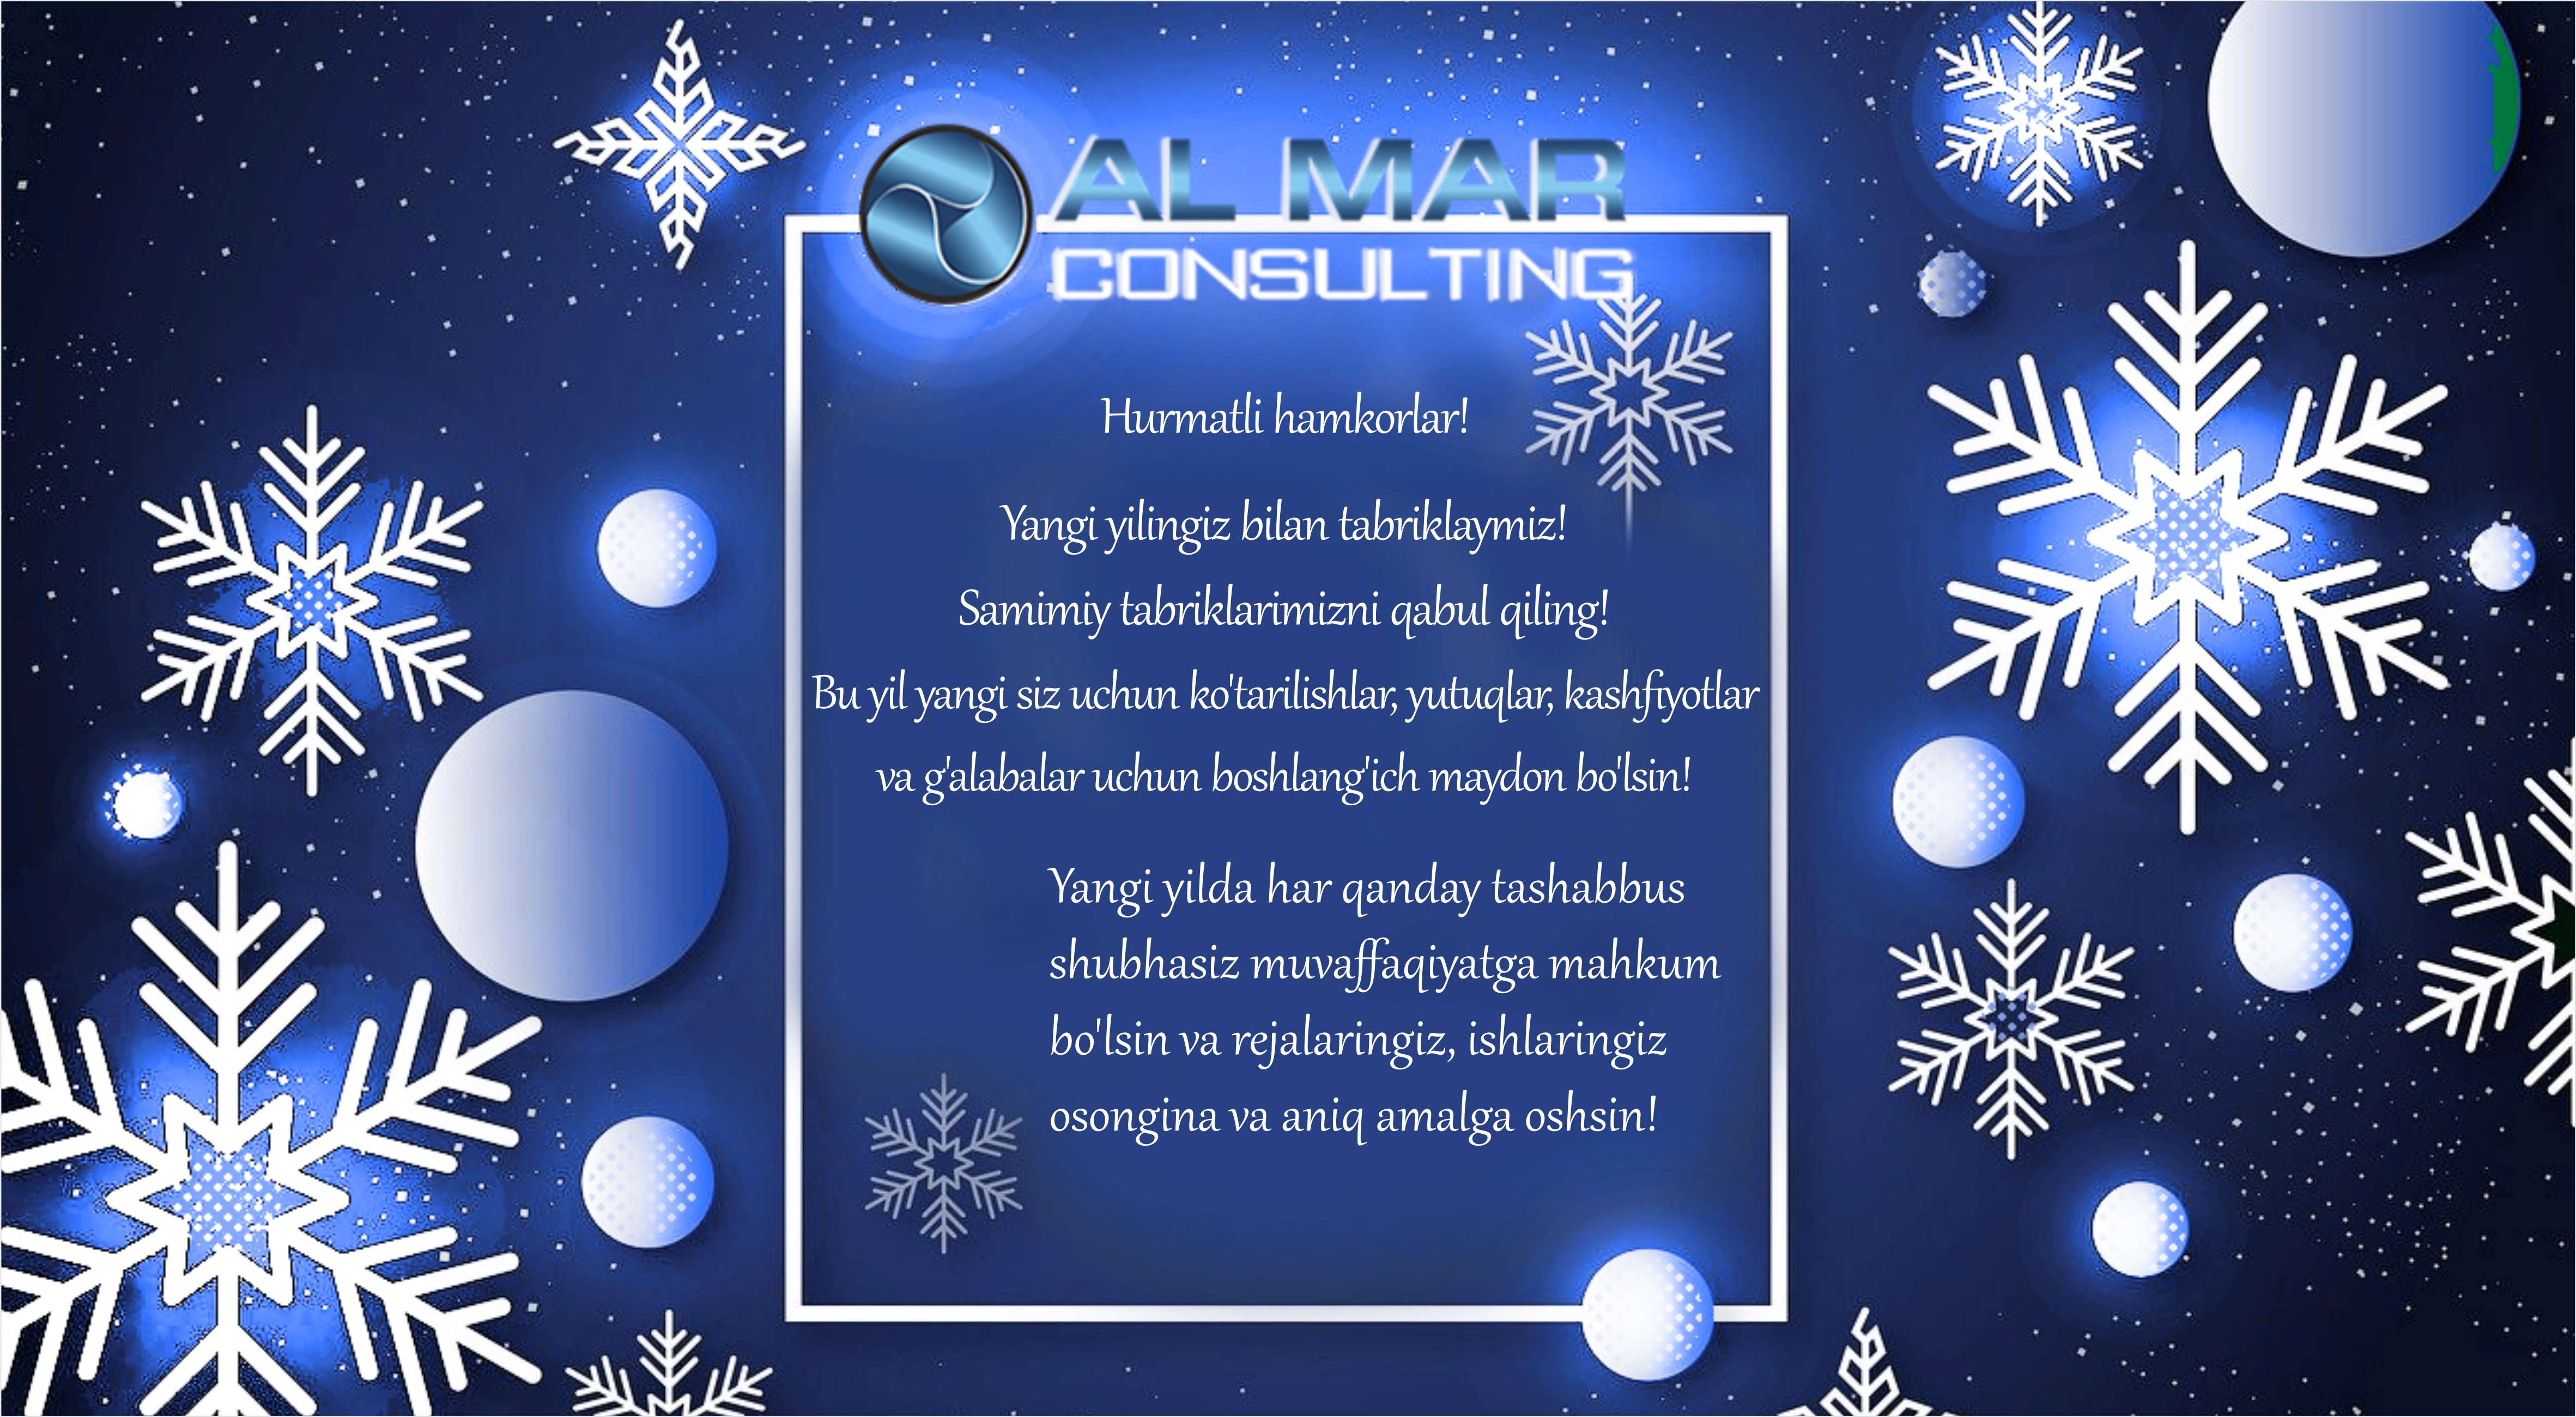 The AL MAR CONSULTING  wishes a Happy New Year!